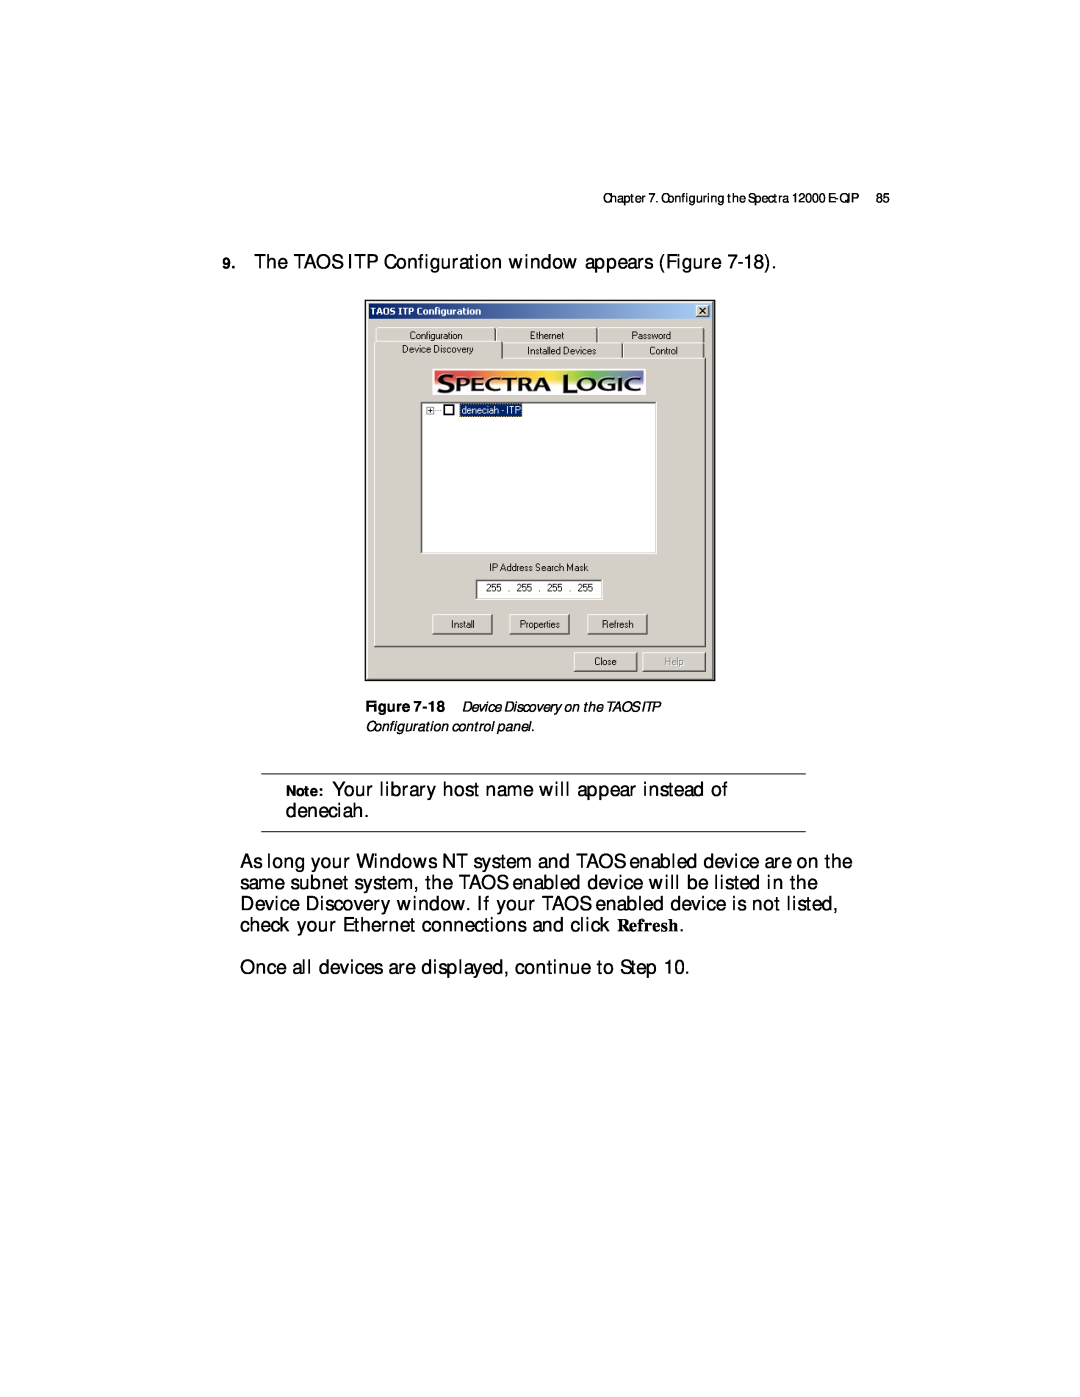 Spectra Logic Spectra 12000 manual 18 Device Discovery on the TAOS ITP, The TAOS ITP Configuration window appears Figure 